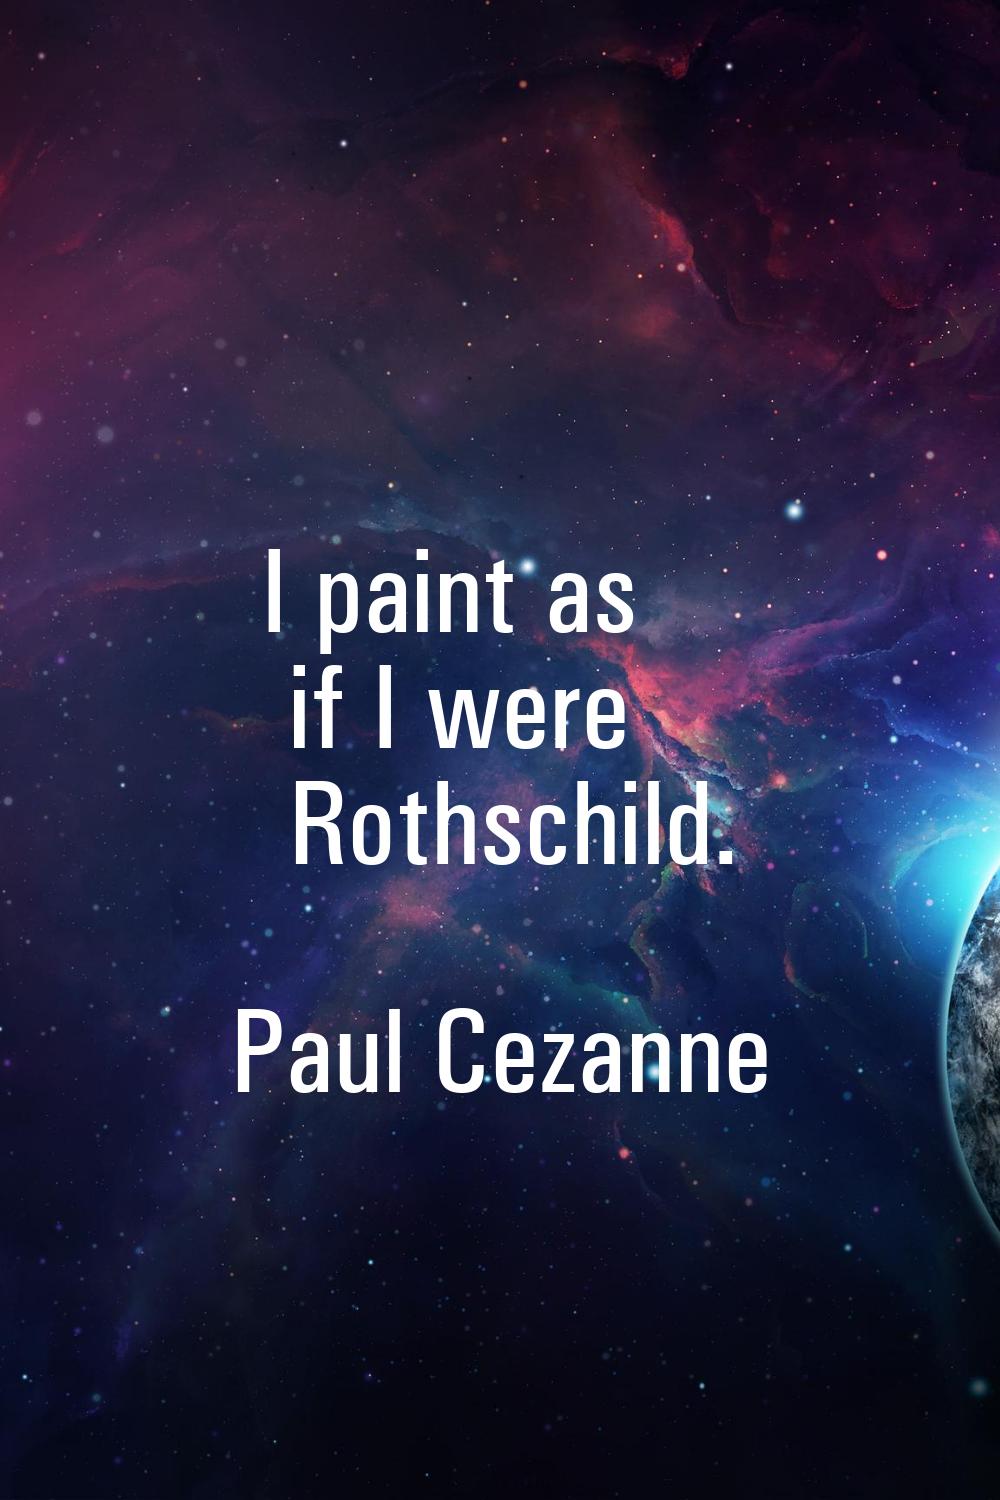 I paint as if I were Rothschild.